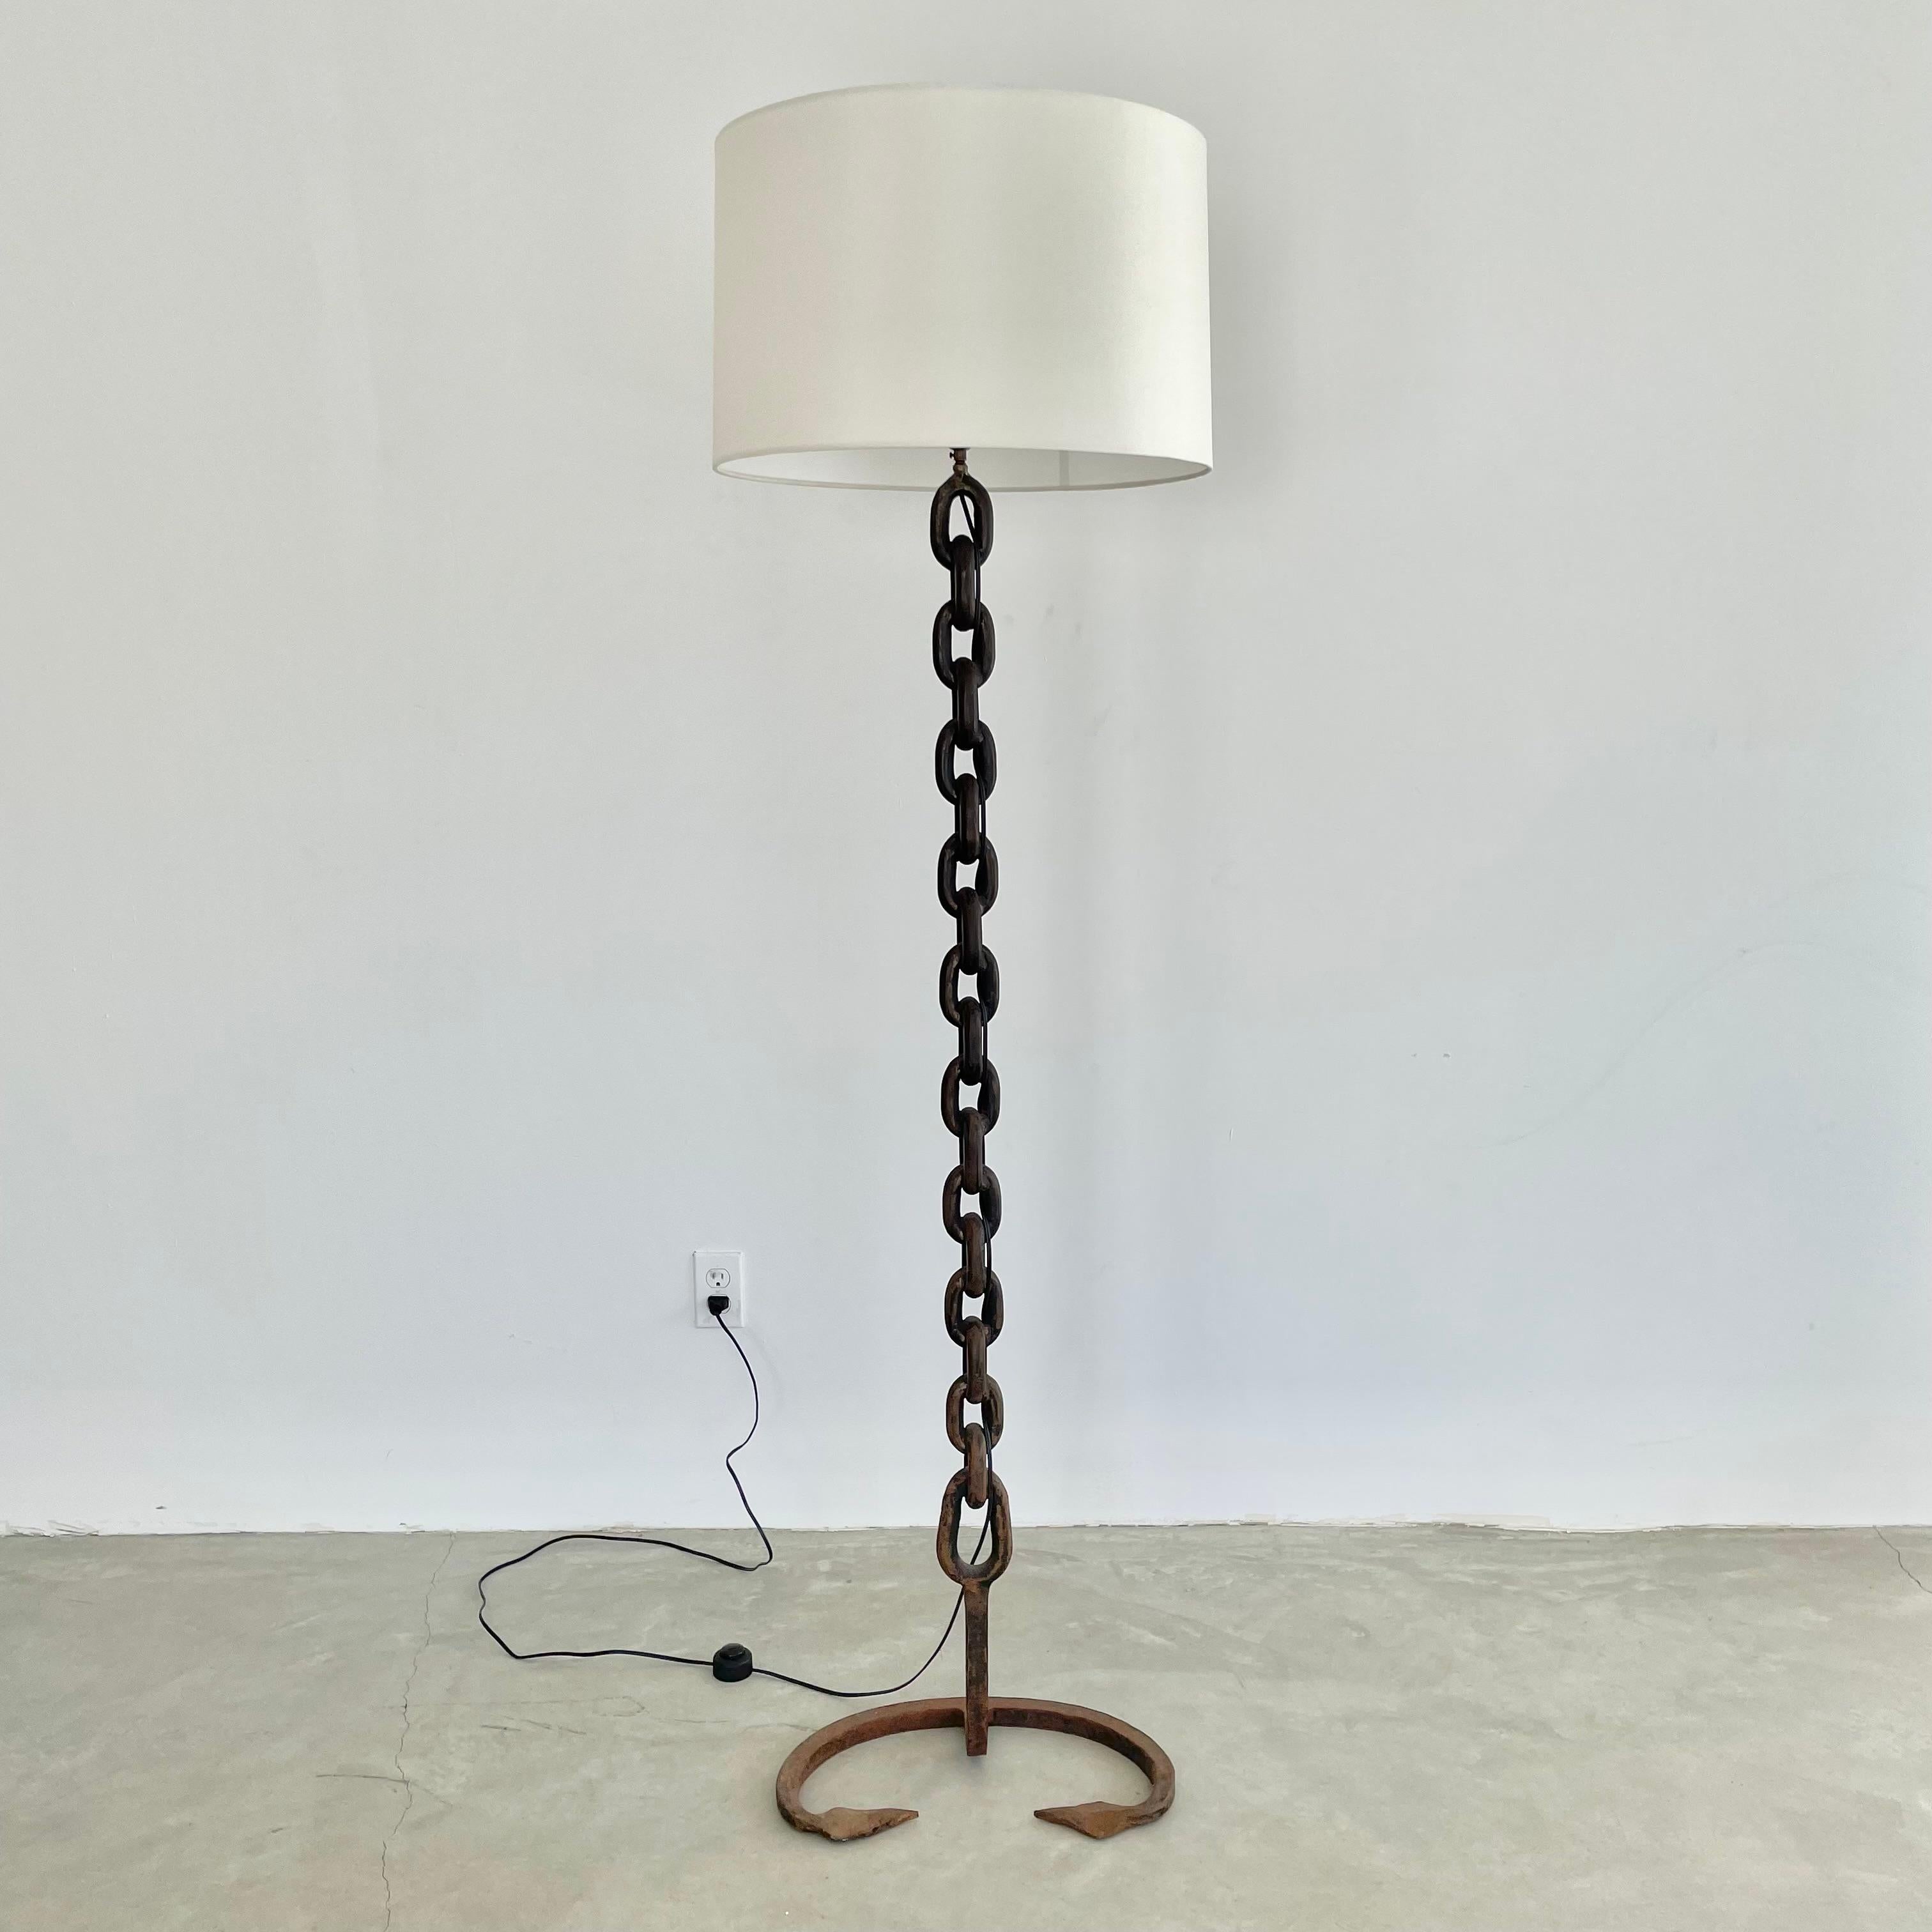 Brutalist iron chain link floor lamp, made in 1960s France. Just under 6 feet tall. Extremely heavy and substantial lamp with a thick chain link. Unique trident style base with rustic iron boat chain welded together and painted in a matte black with